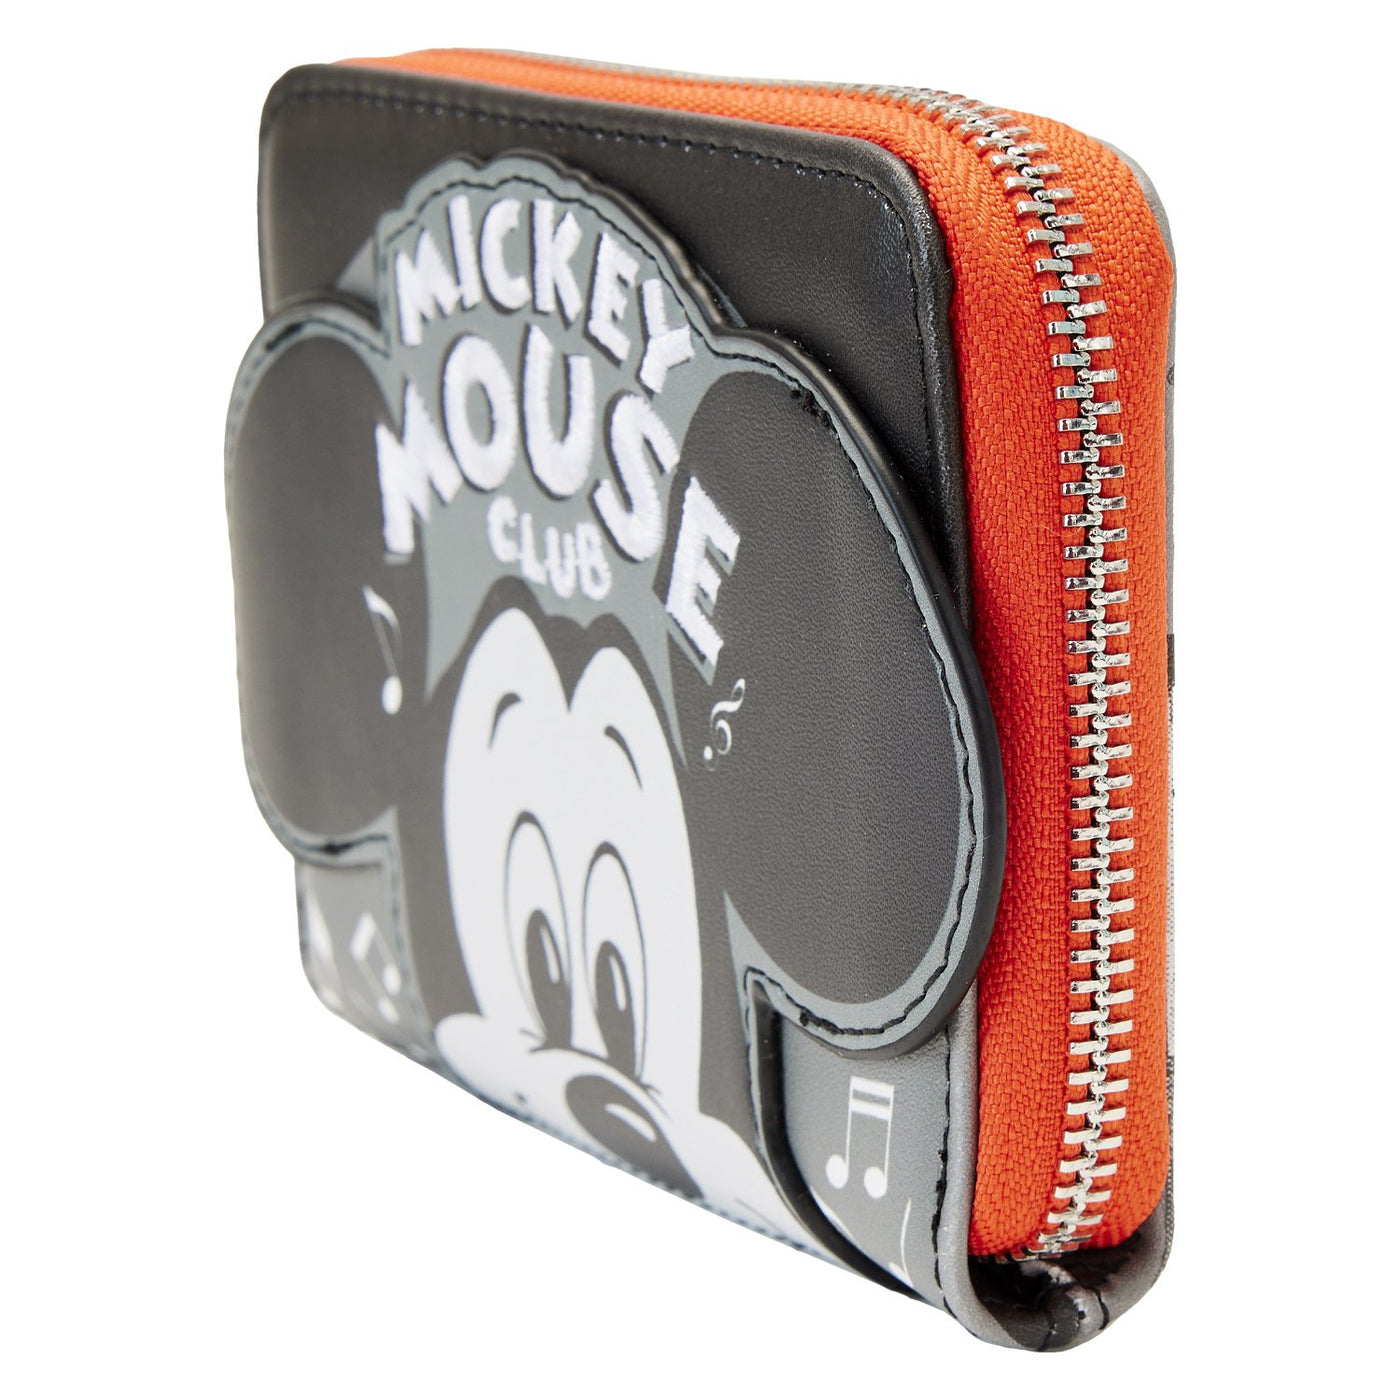 671803451384 - Loungefly Disney 100th Mickey Mouse Club Zip-Around Wallet - Side View